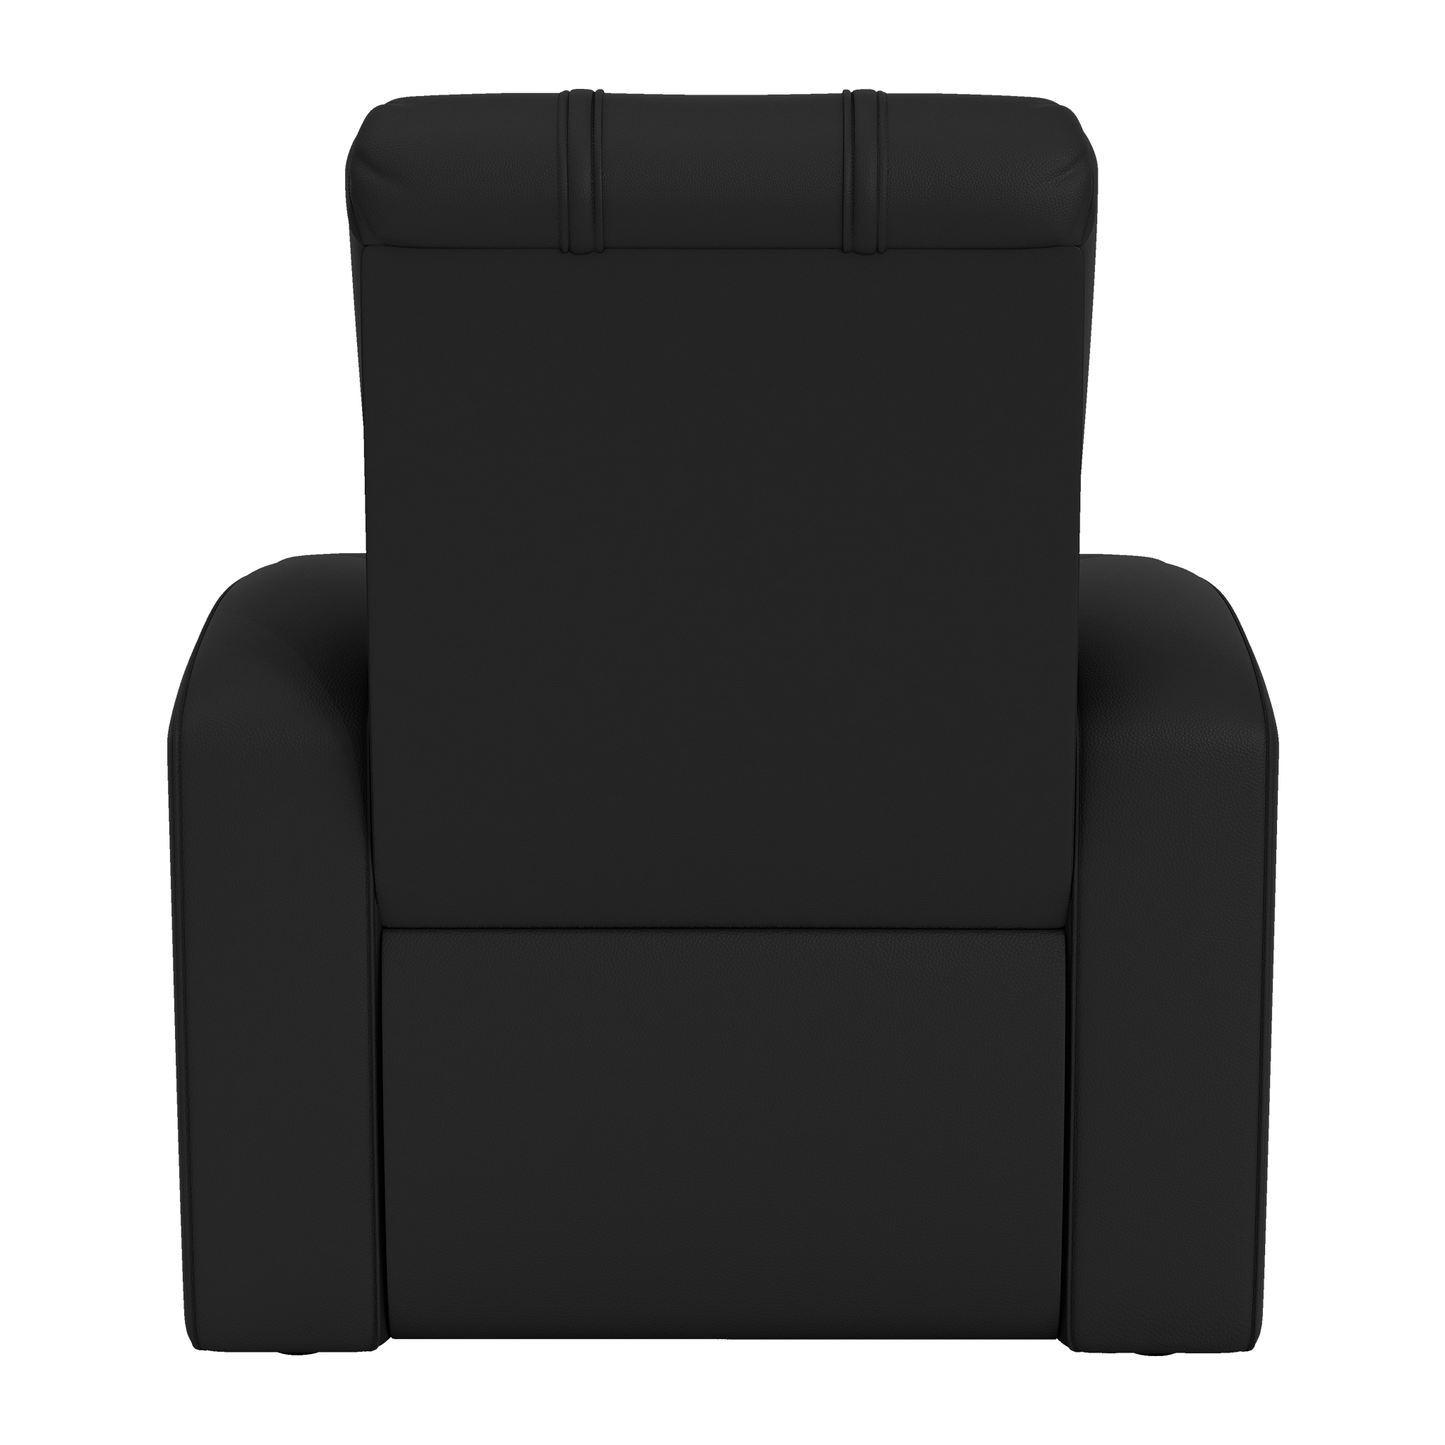 Relax Home Theater Recliner with German Shepherd Logo Panel